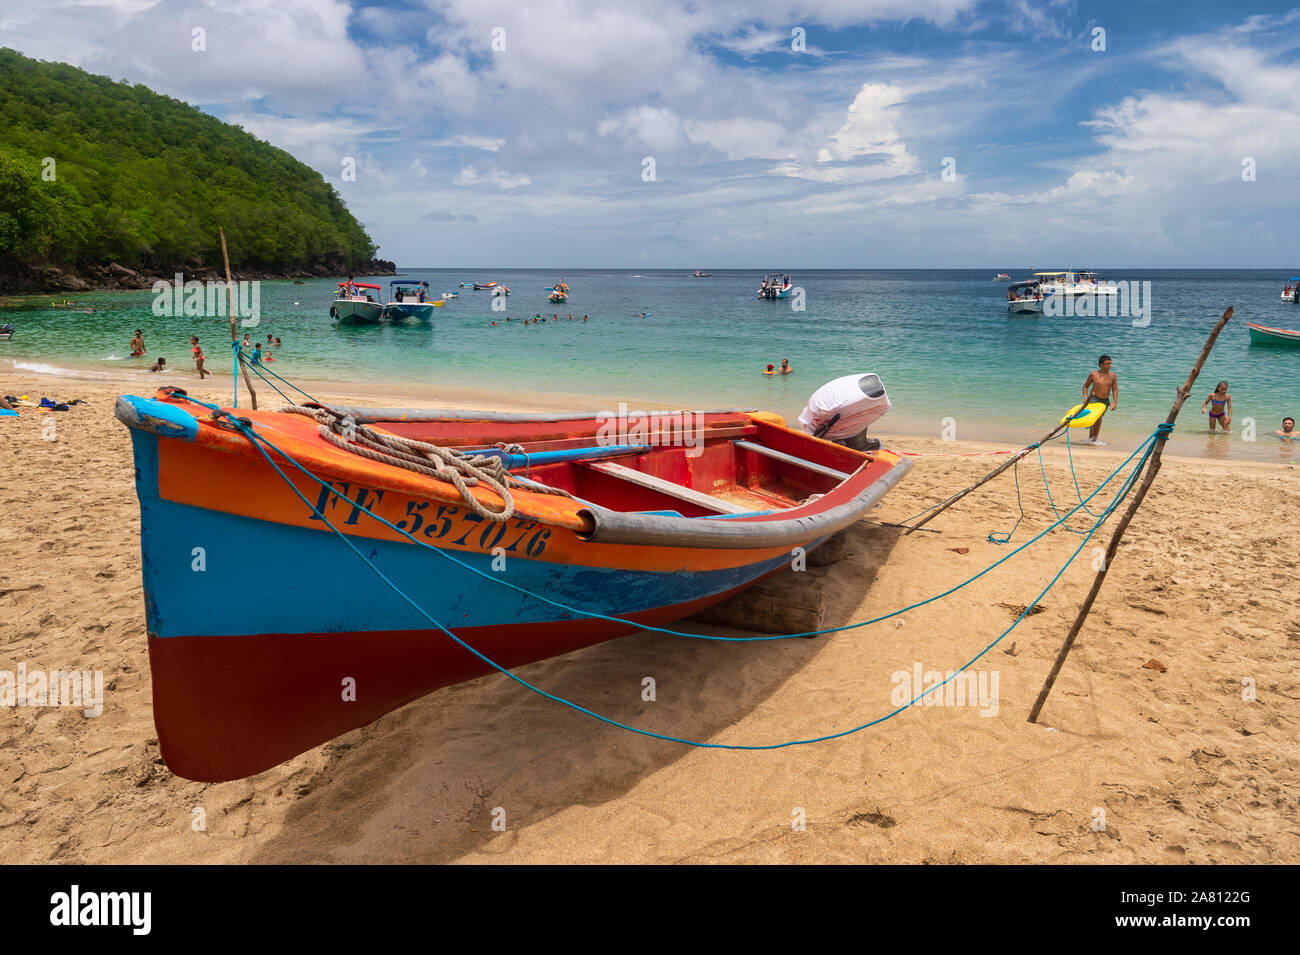 Martinique, France - 17 August 2019: Colorful fishing boats at Anse Dufour. Stock Photo